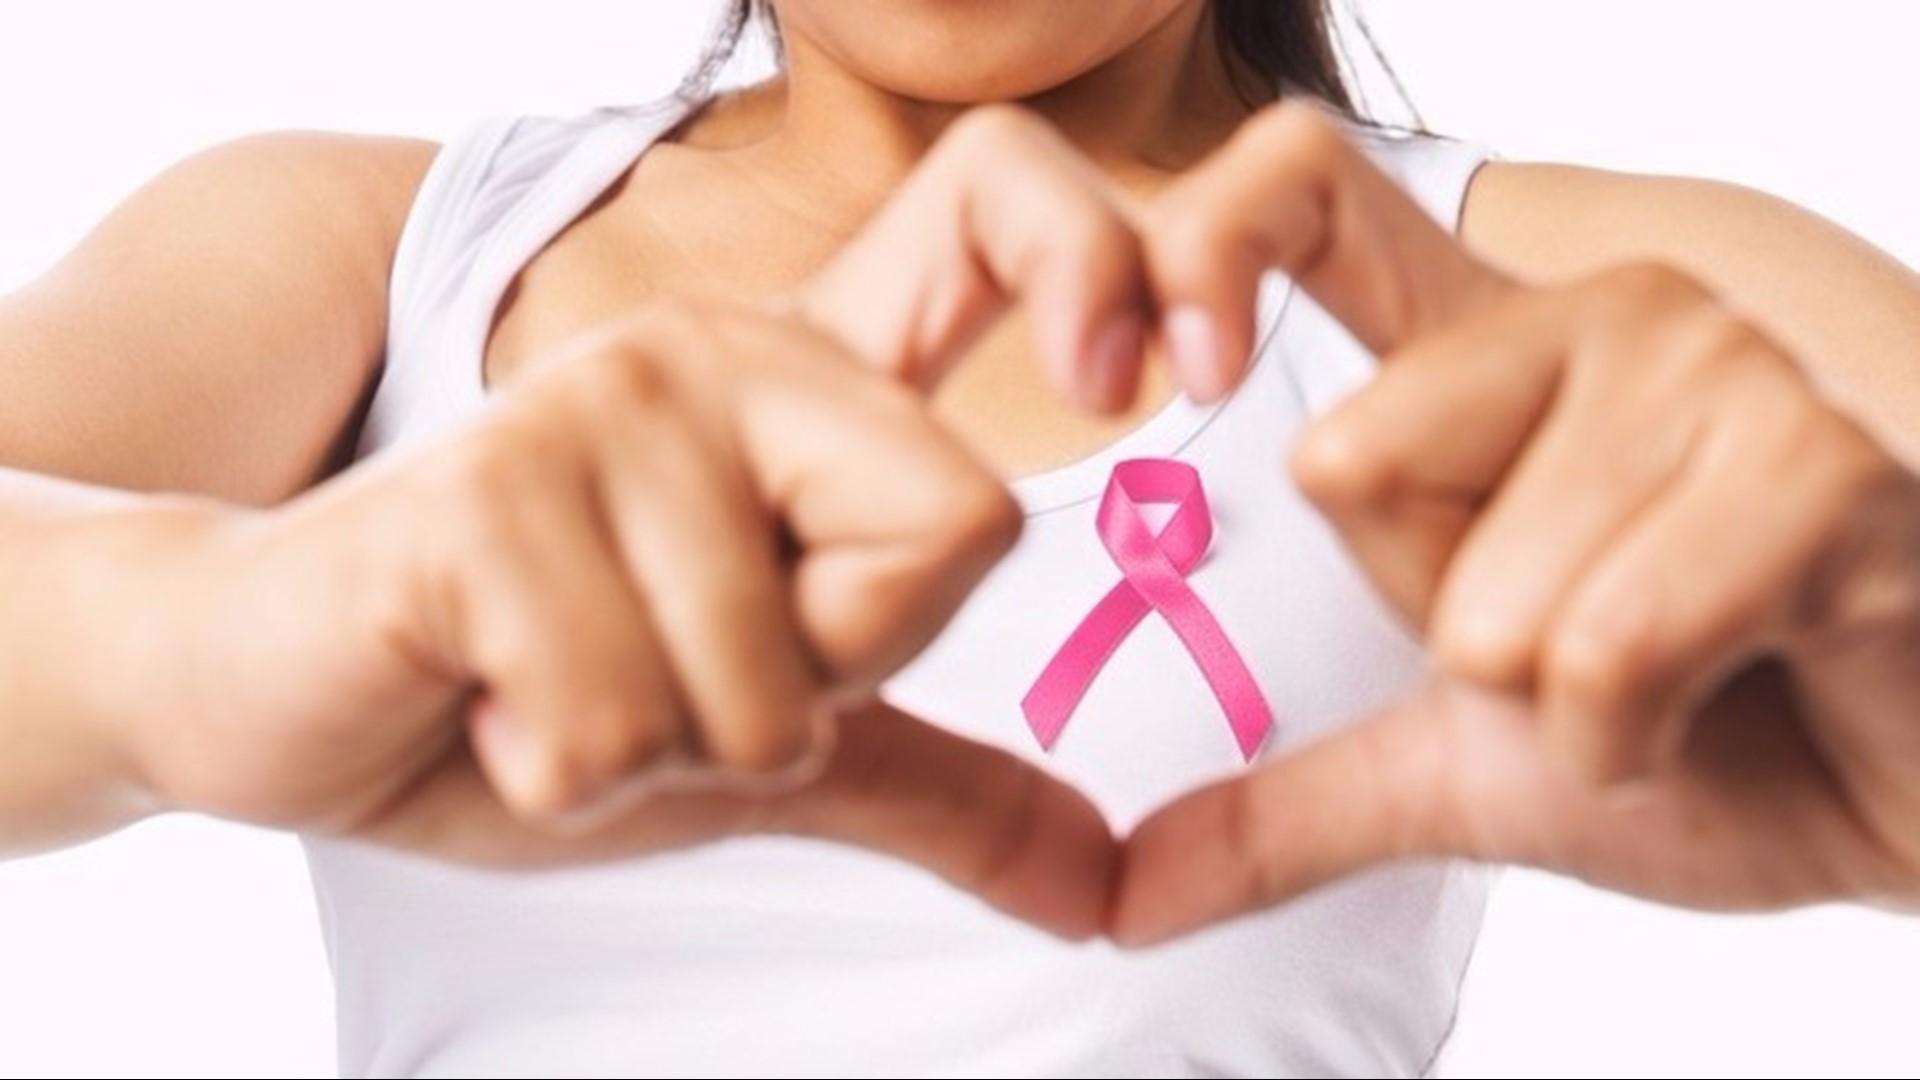 Breast cancer awareness month runs through October and many local organizations are making screenings a bit easier.